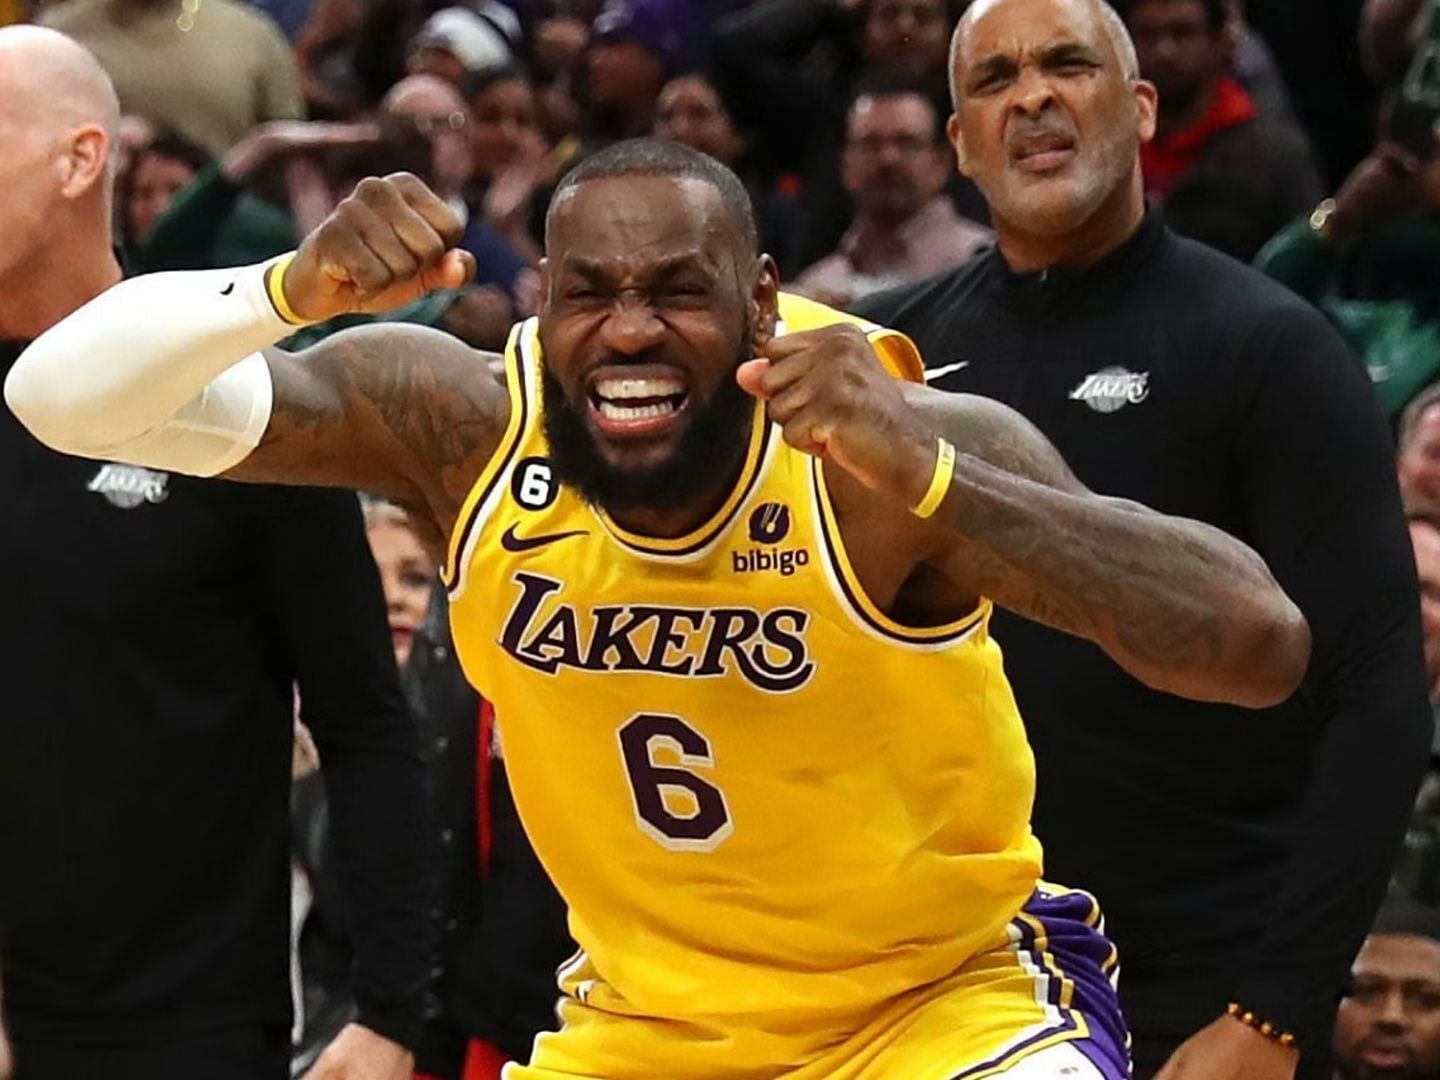 LeBron James of the LA Lakers during a game against the Boston Celtics.